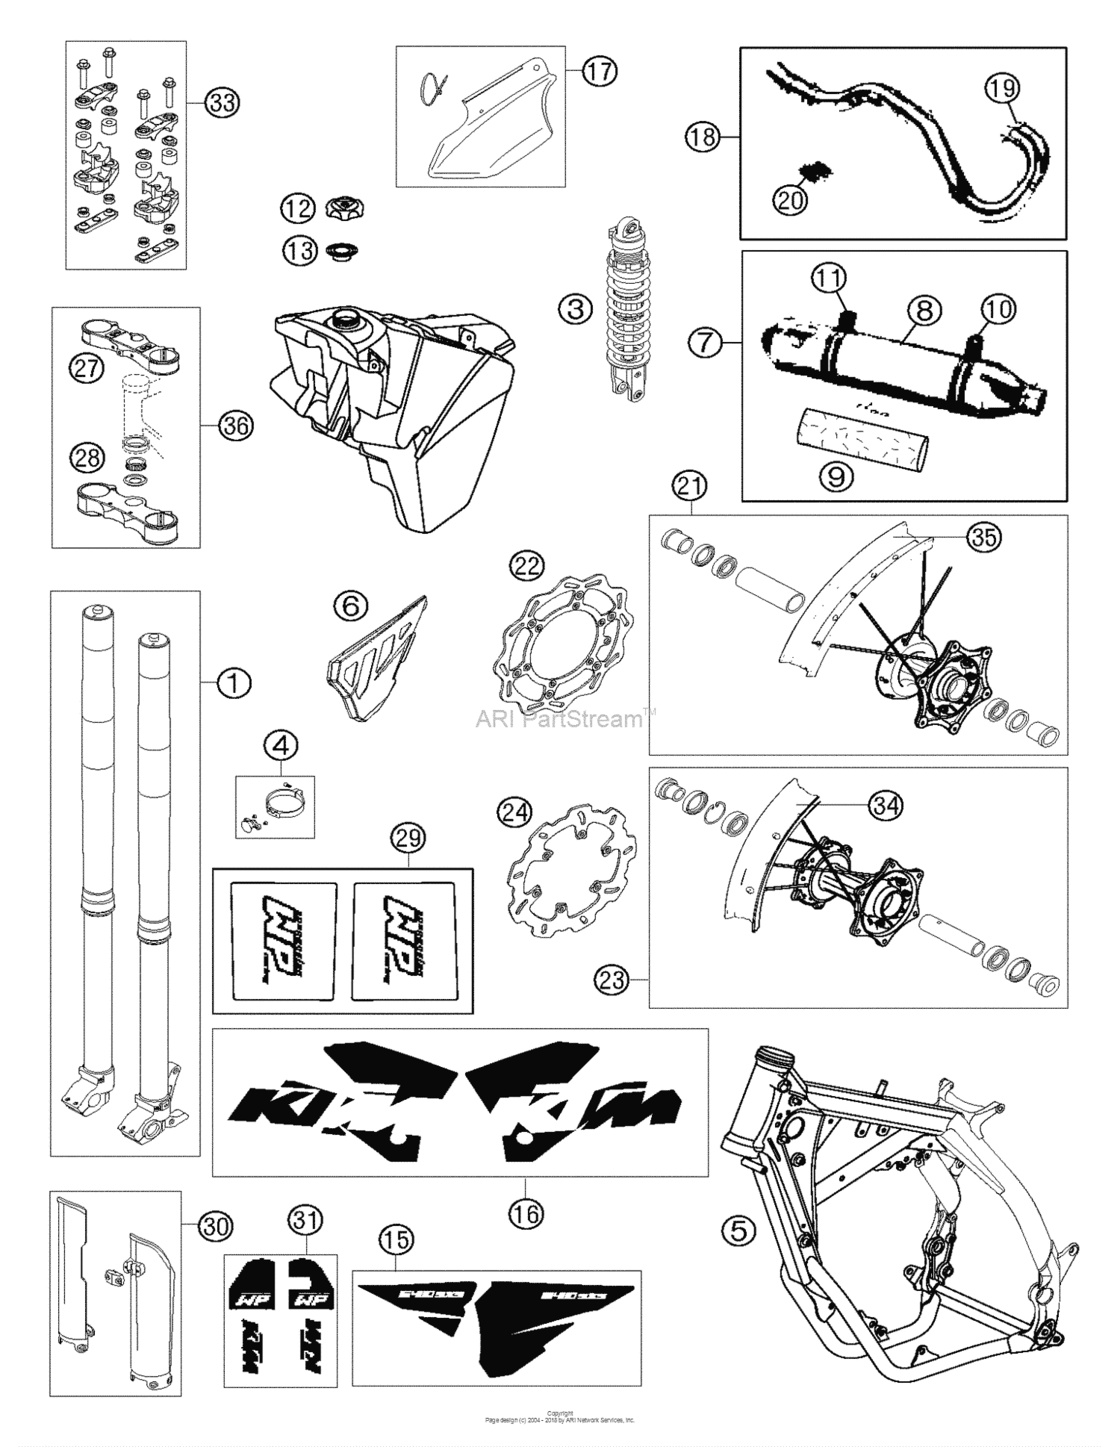 New Parts Chassis